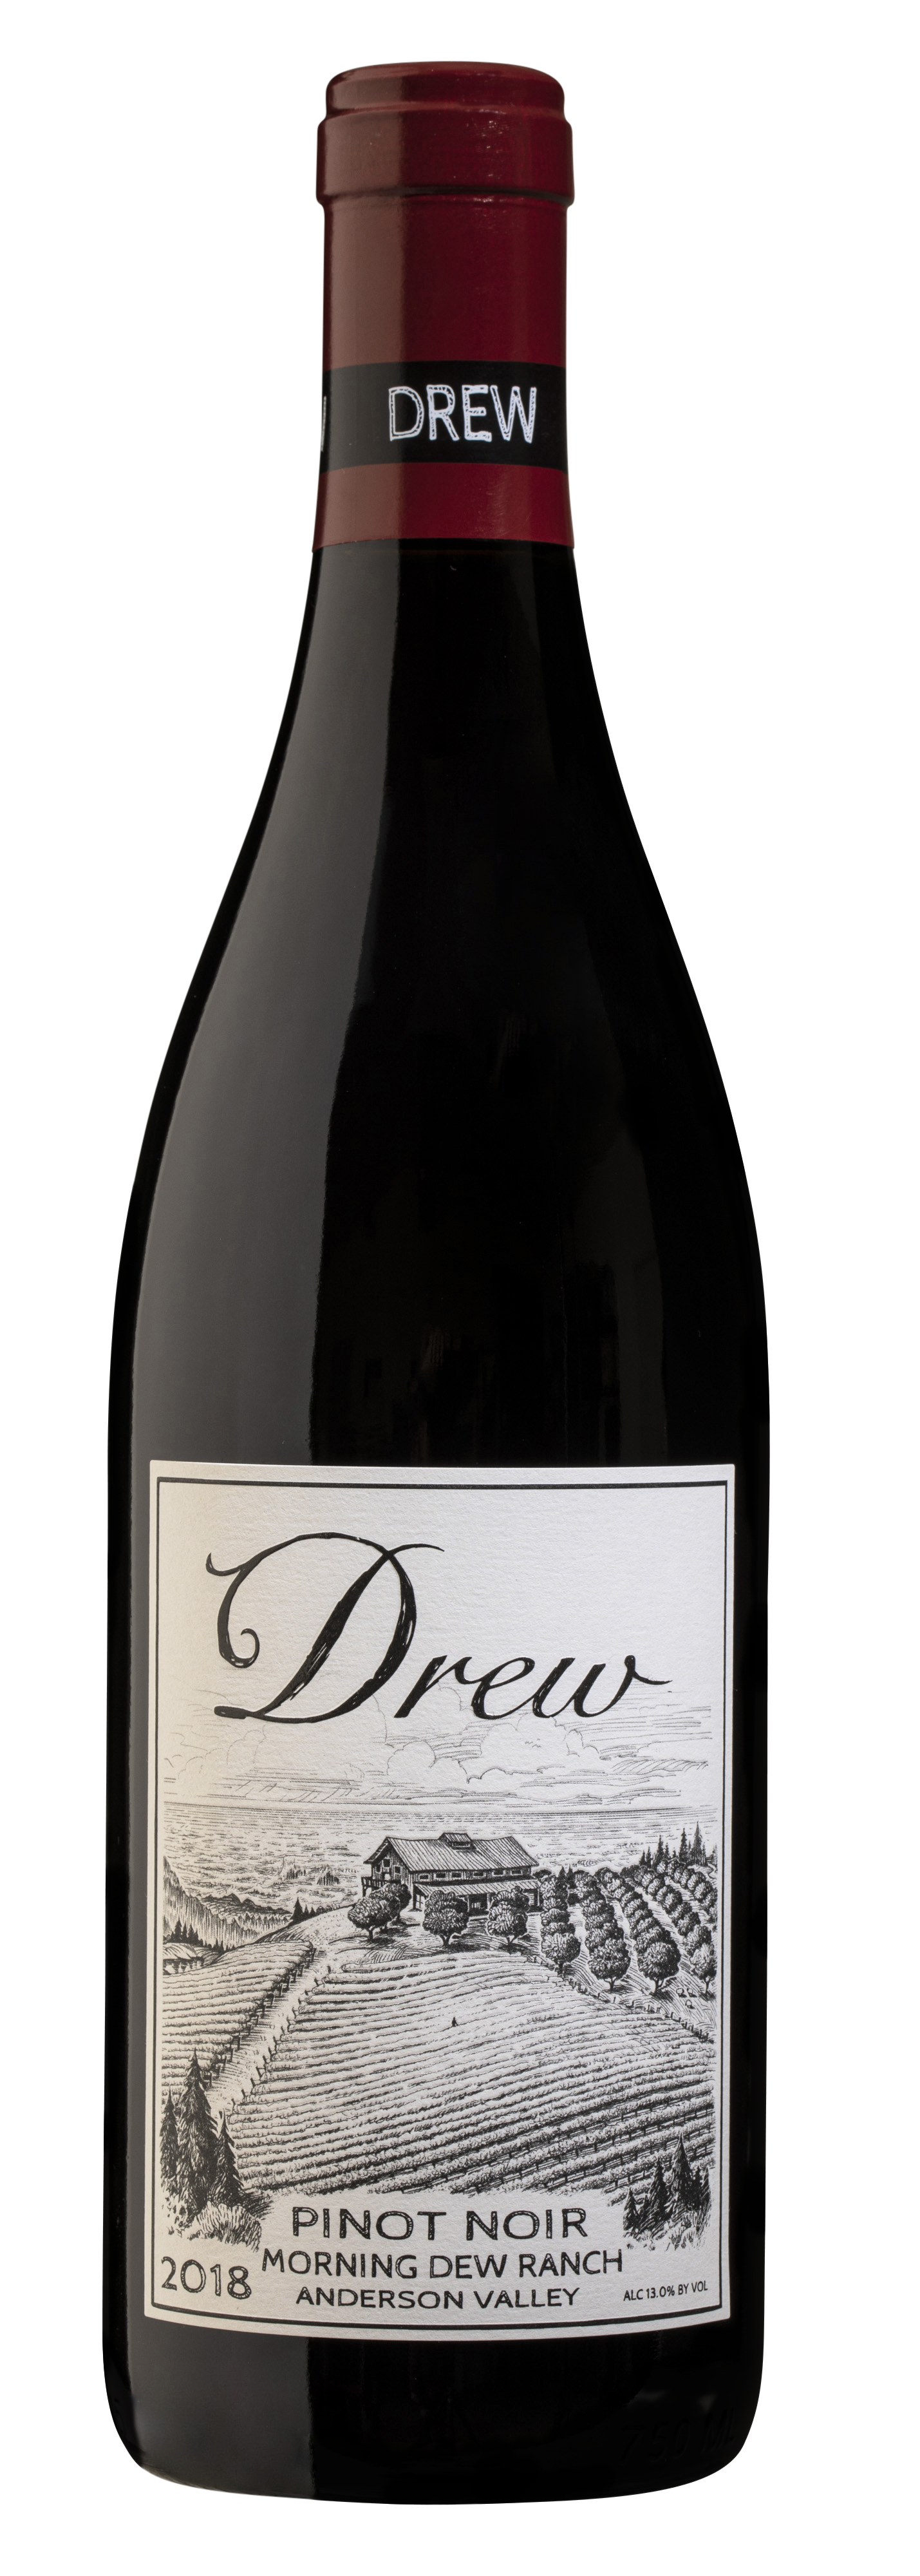 Product Image for 2018 Morning Dew Ranch Pinot Noir